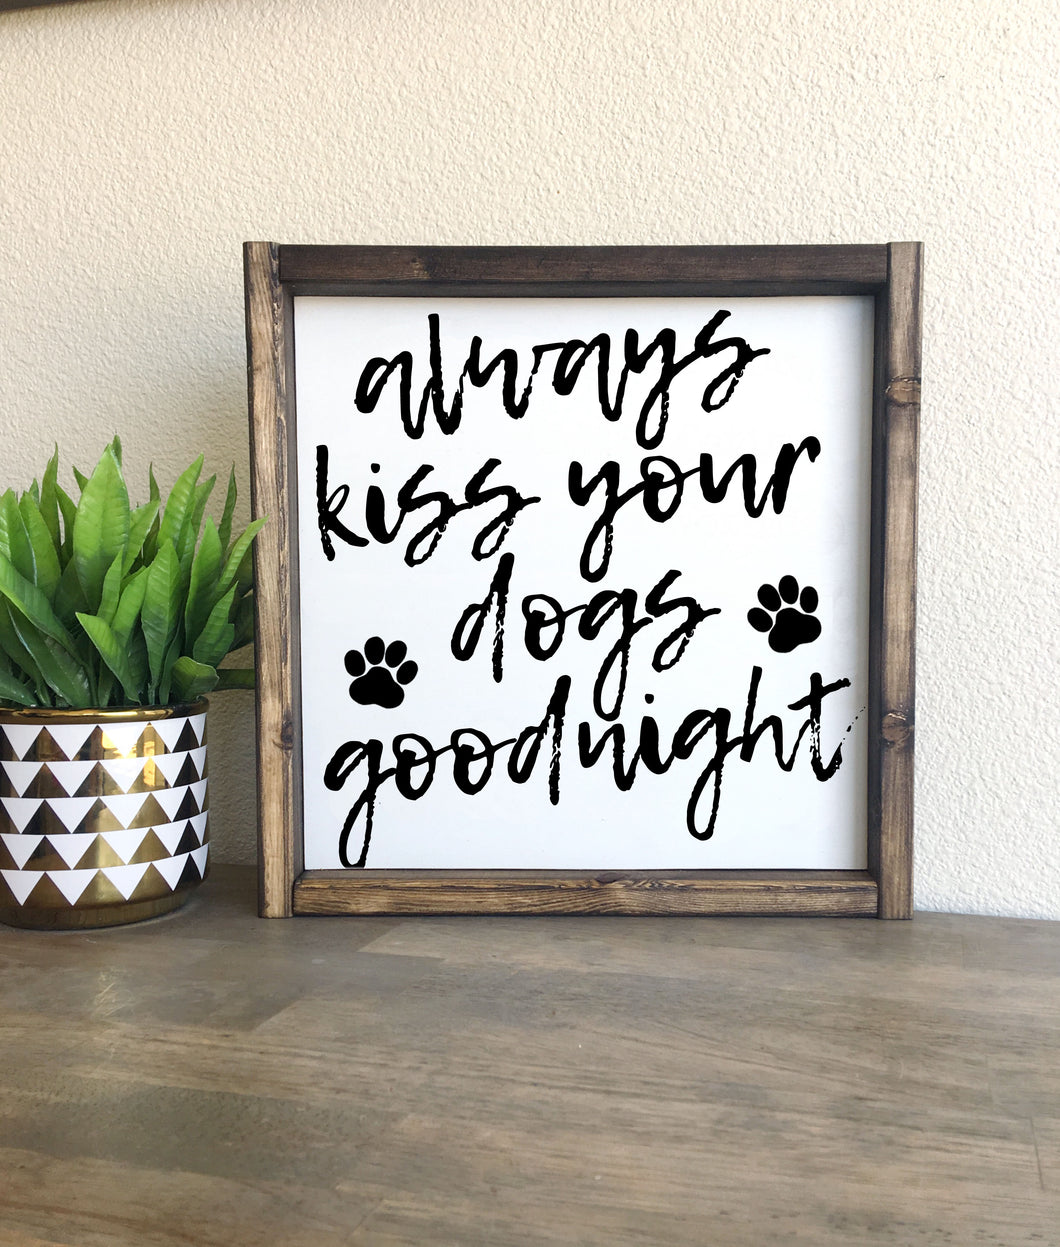 Always kiss your dogs goodnight | Framed wood sign